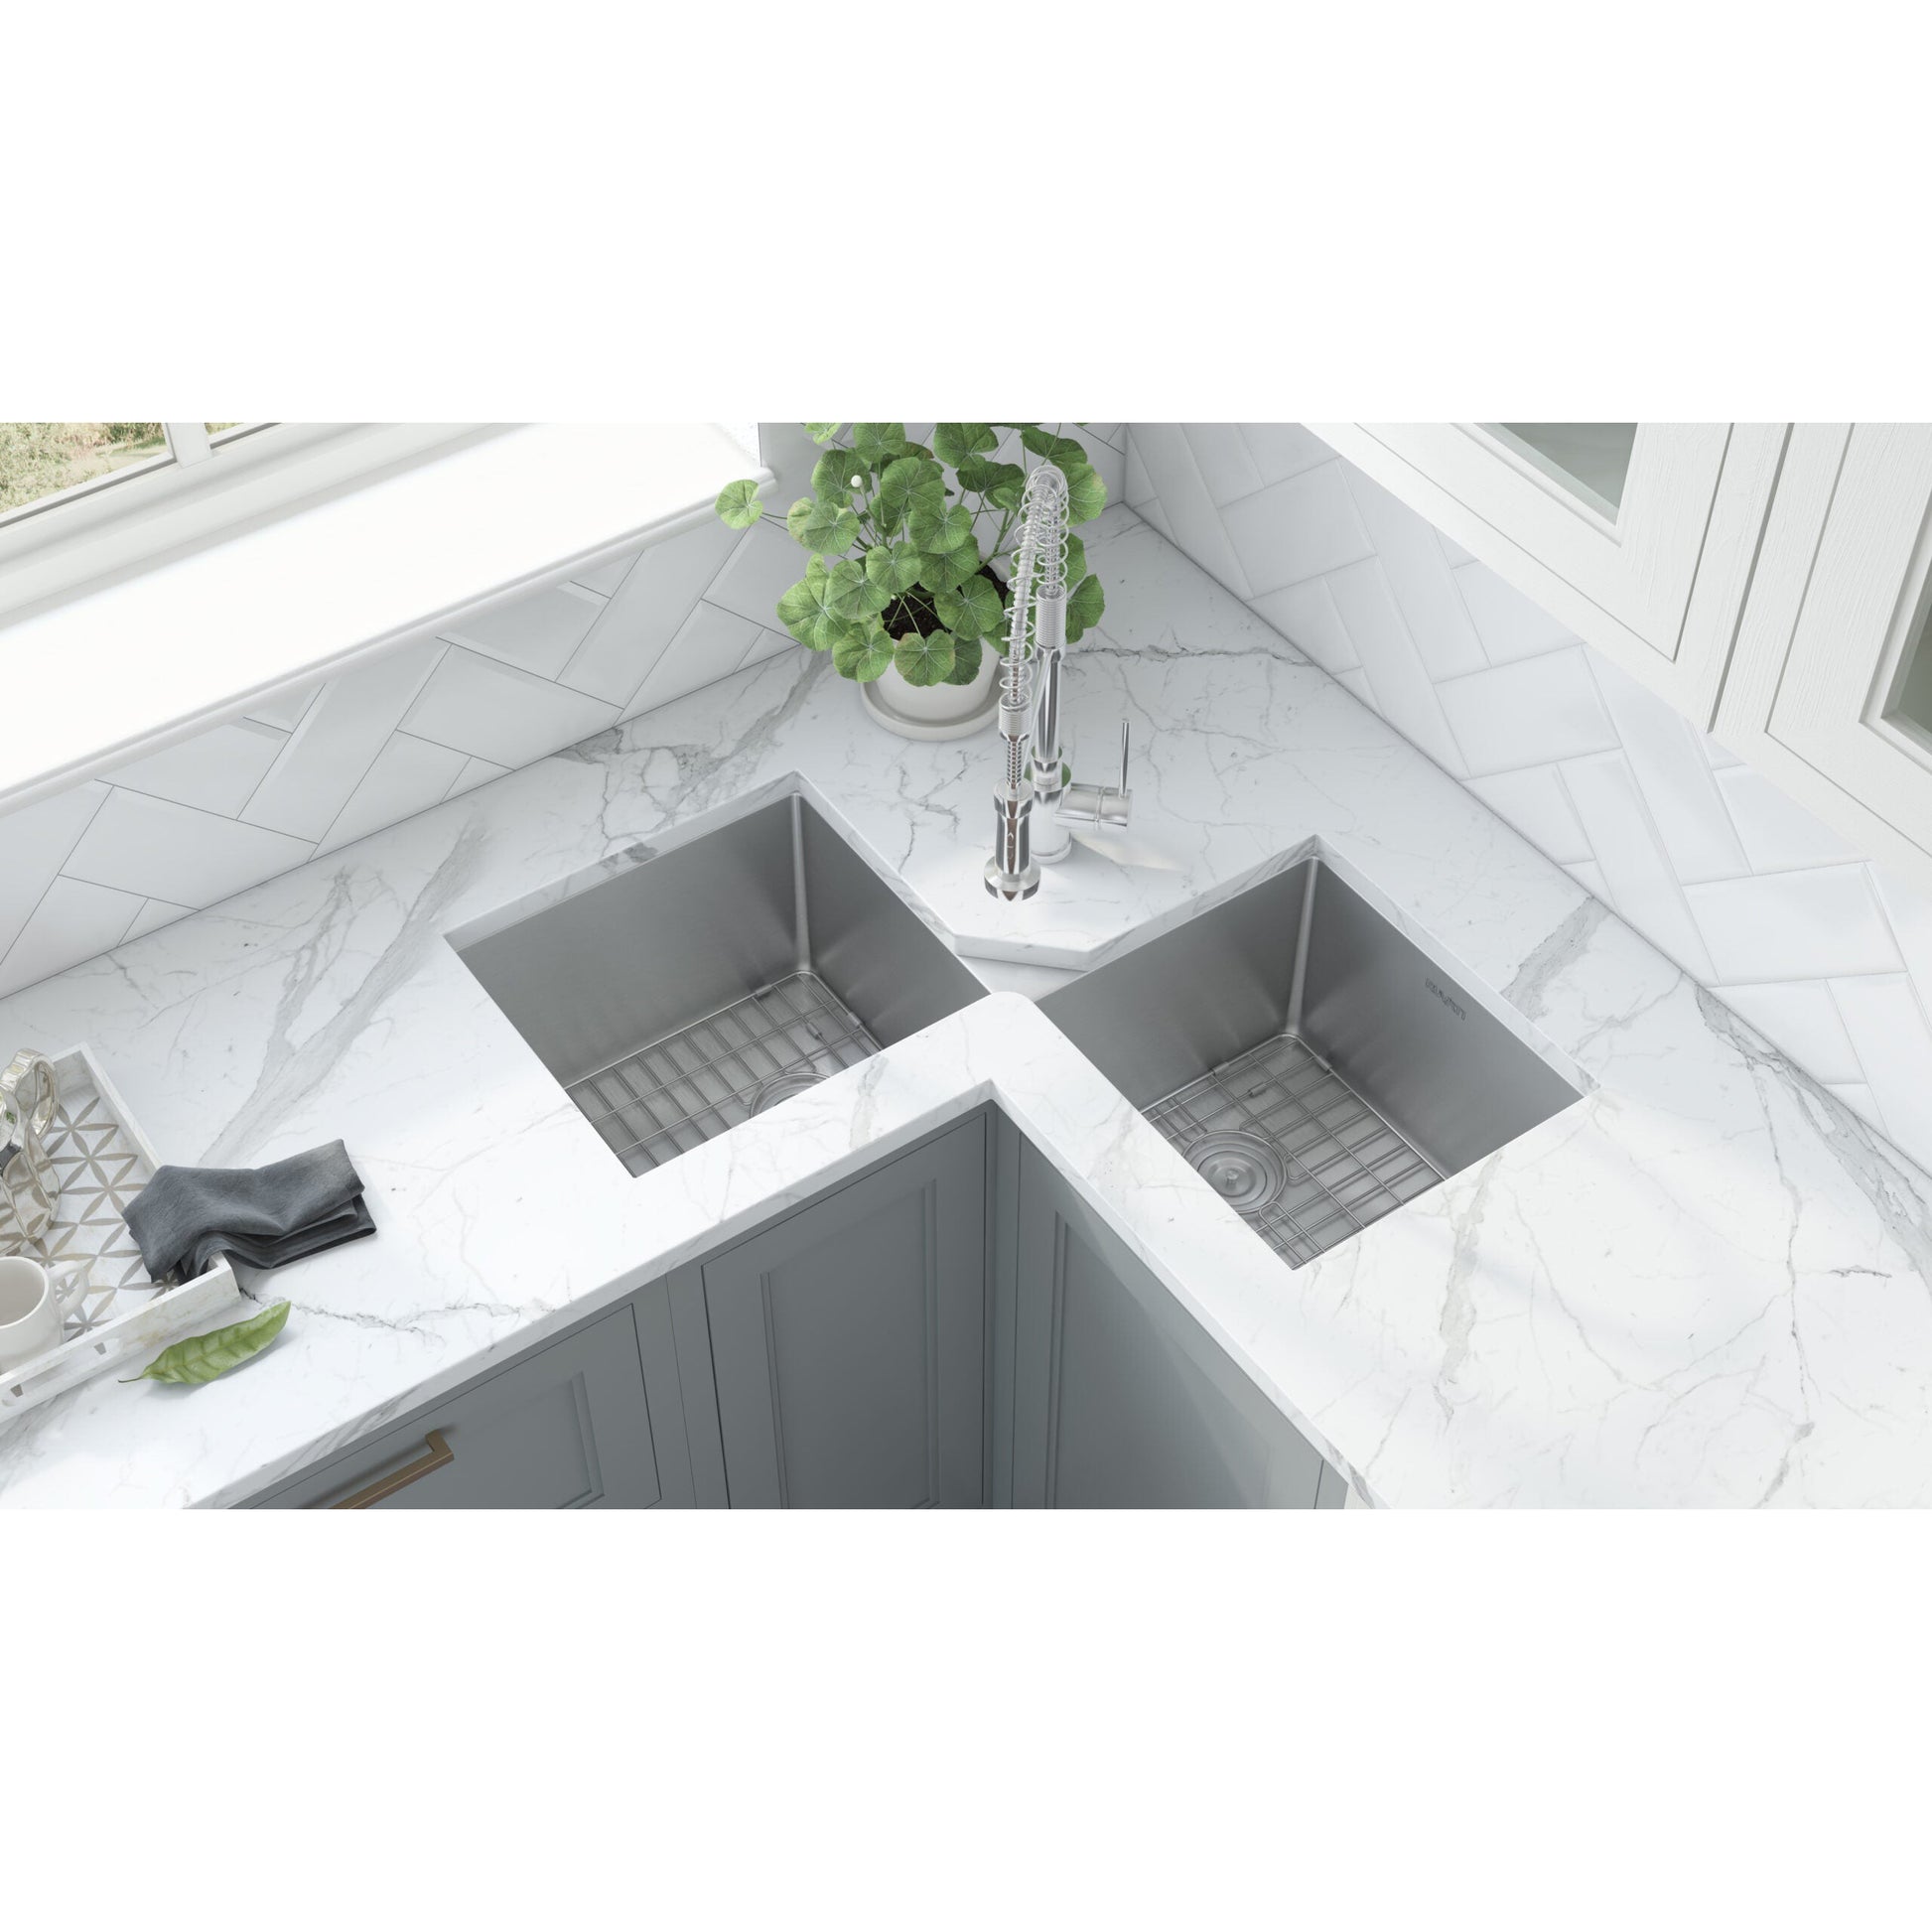 Ruvati Gravena 44” x 22" Undermount Stainless Steel 50/50 Double Bowl Corner Butterfly Kitchen Sink With Basket Strainer, Bottom Rinse Grid and Drain Assembly